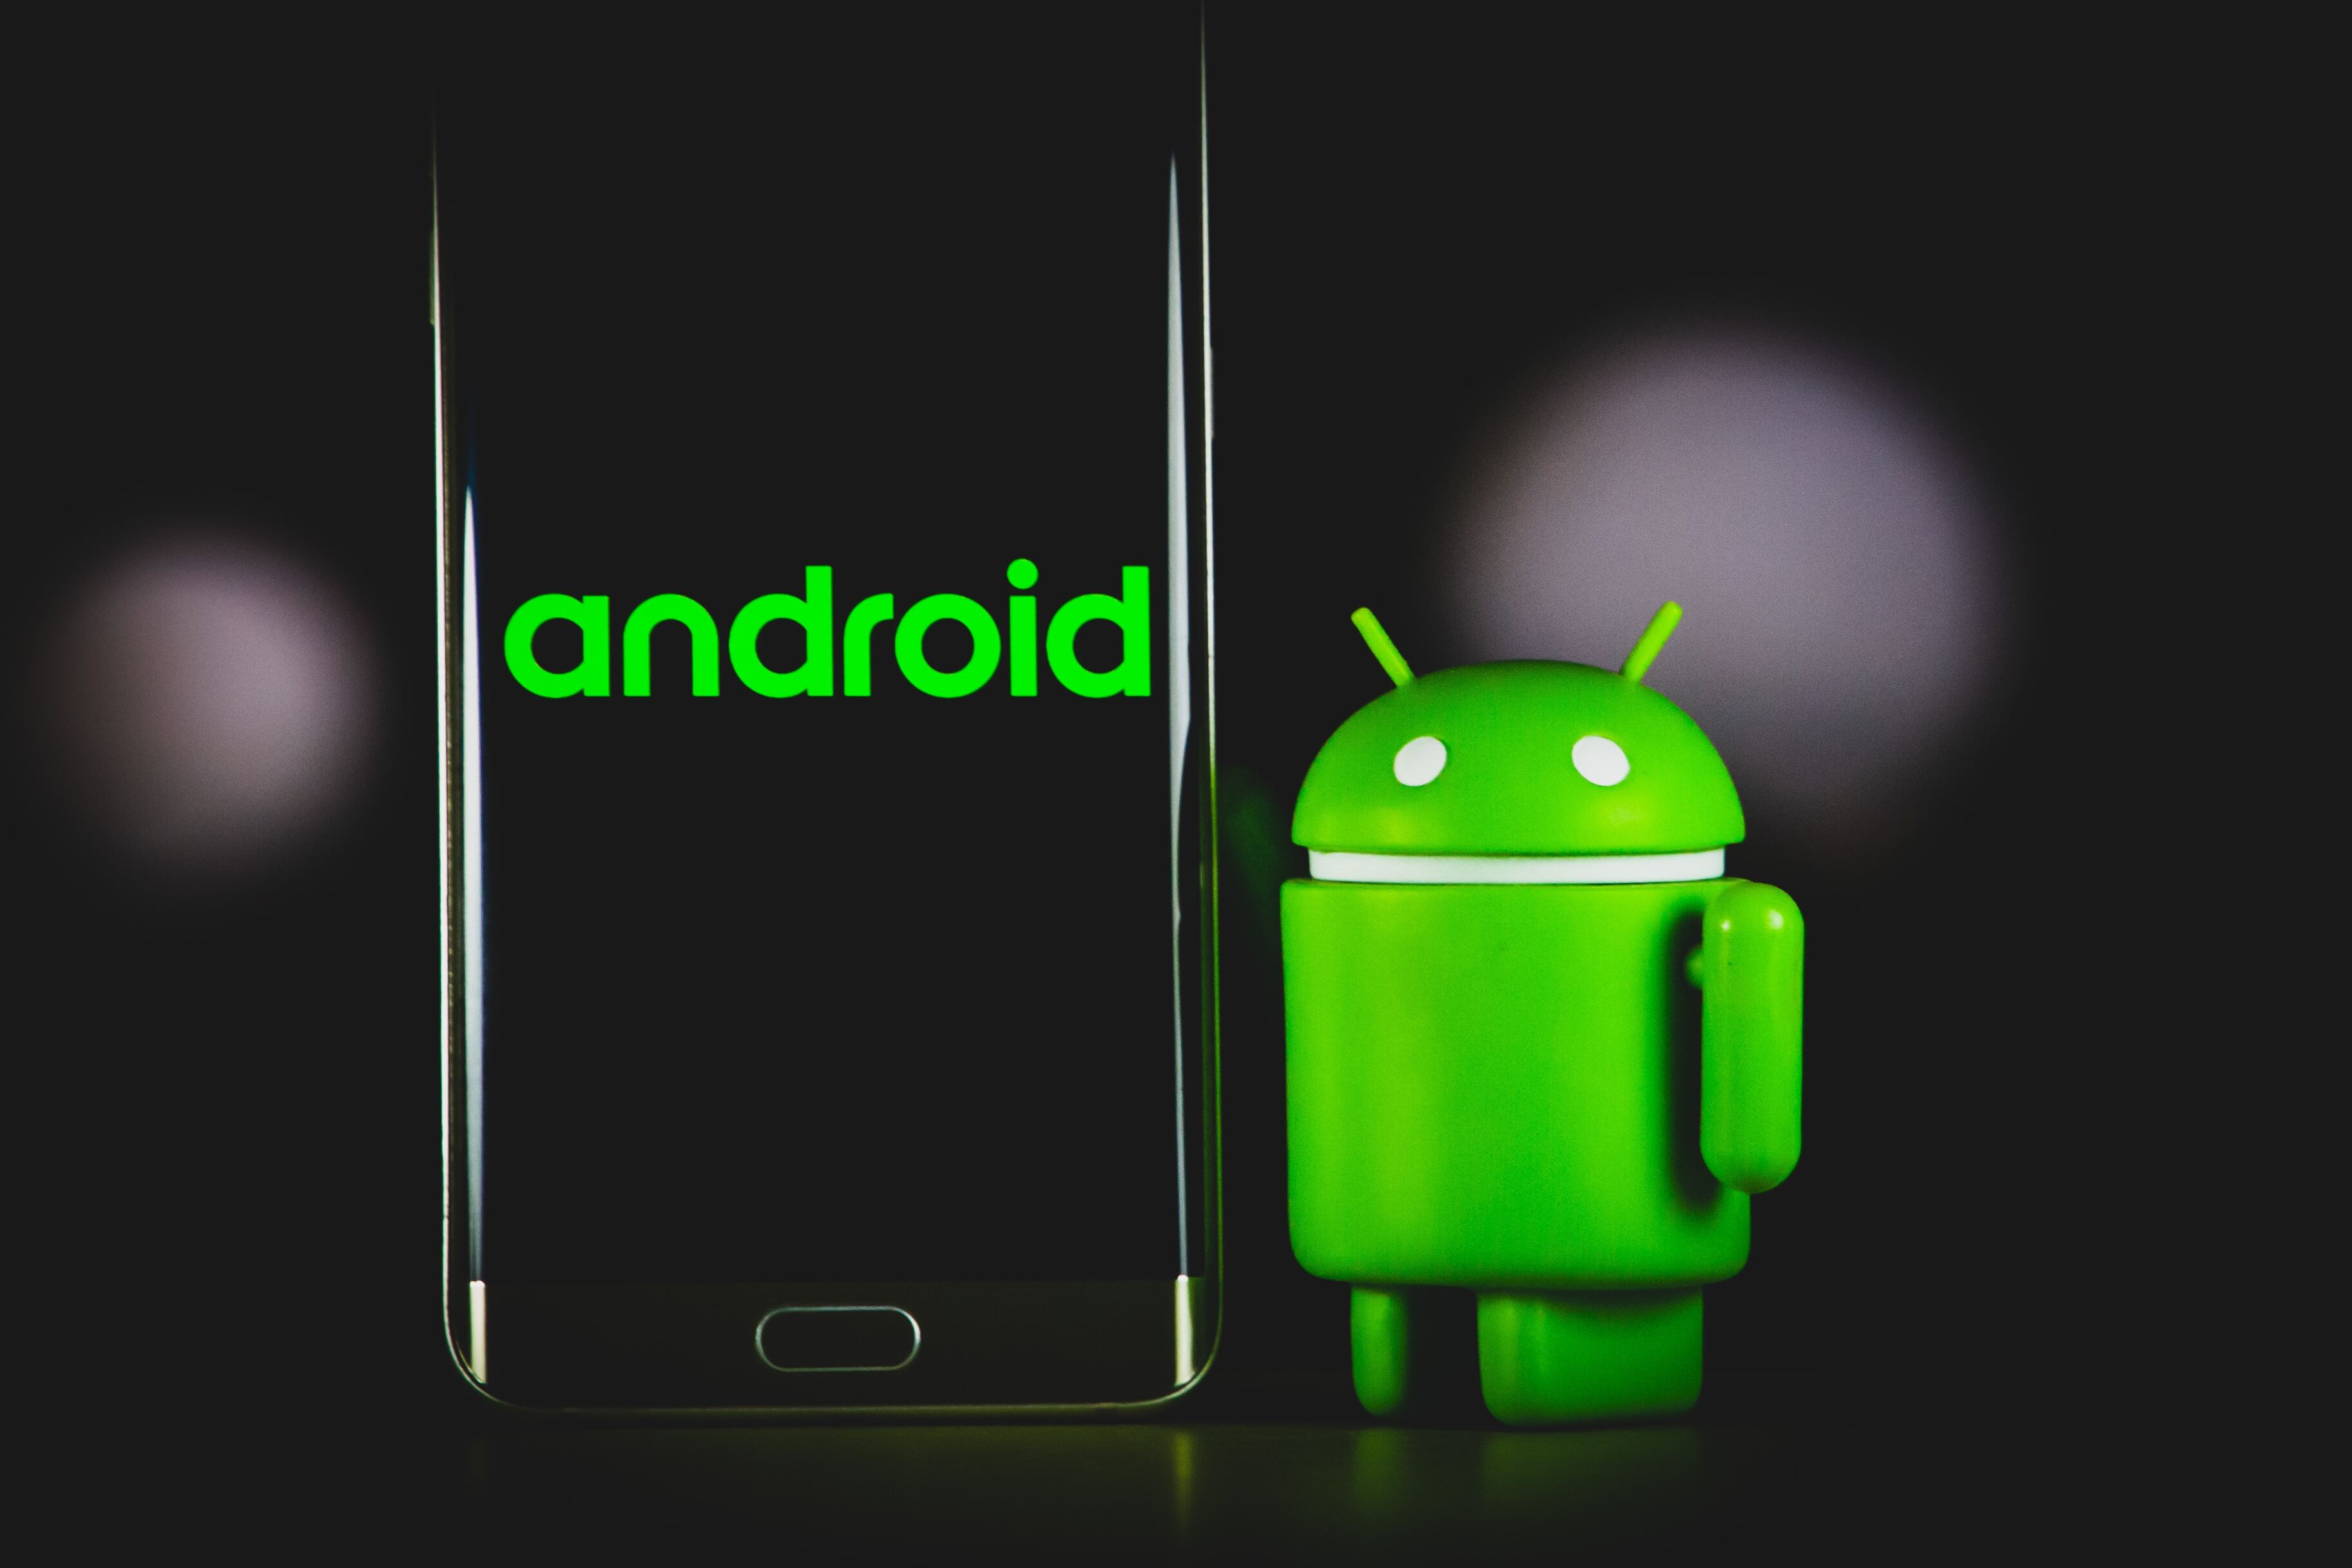    Android-  ,    